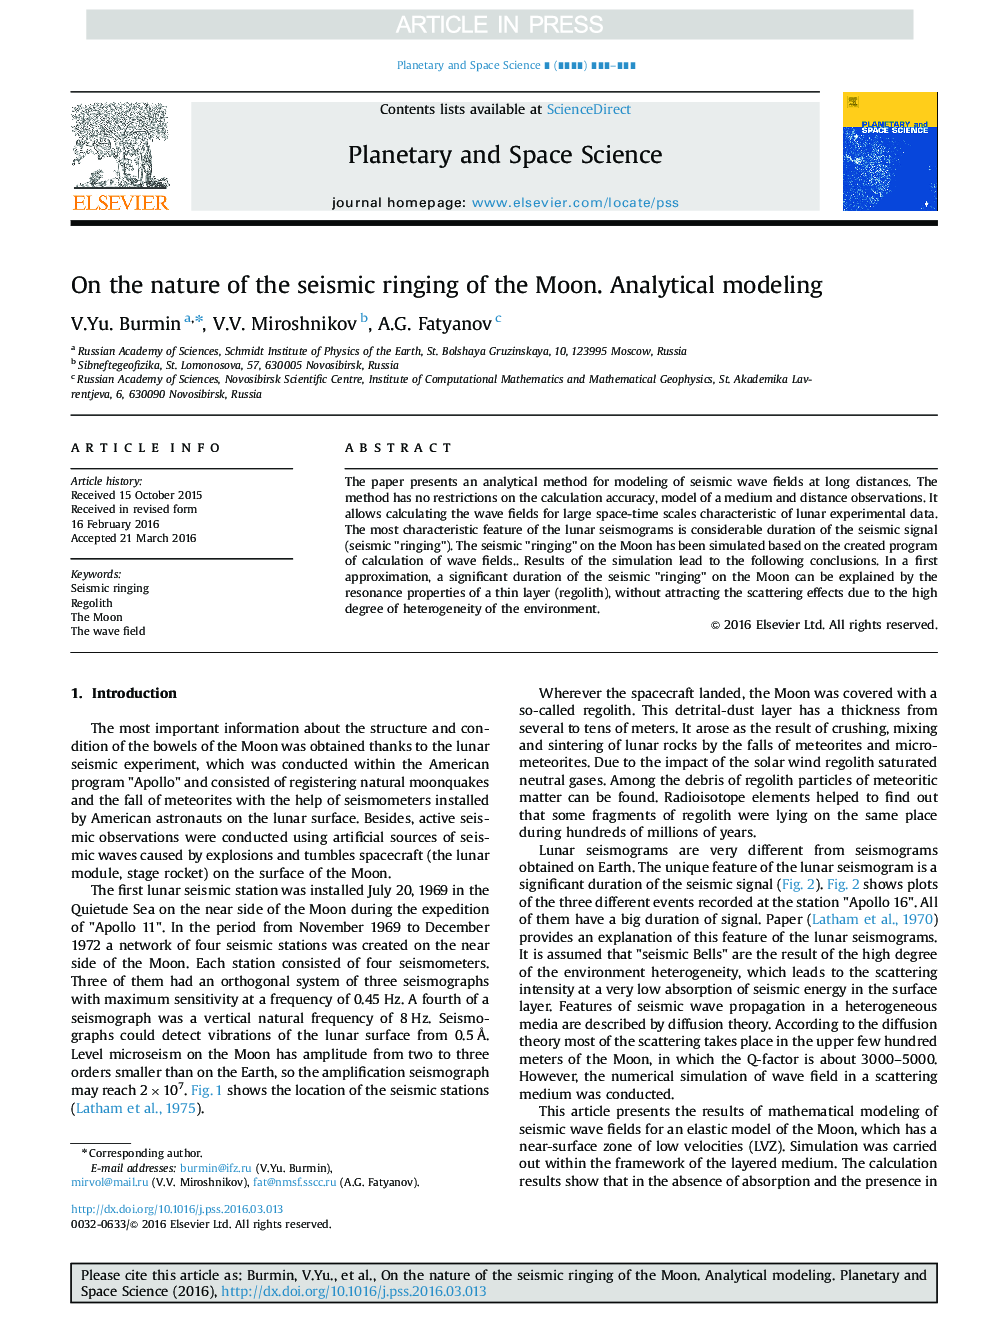 On the nature of the seismic ringing of the Moon. Analytical modeling